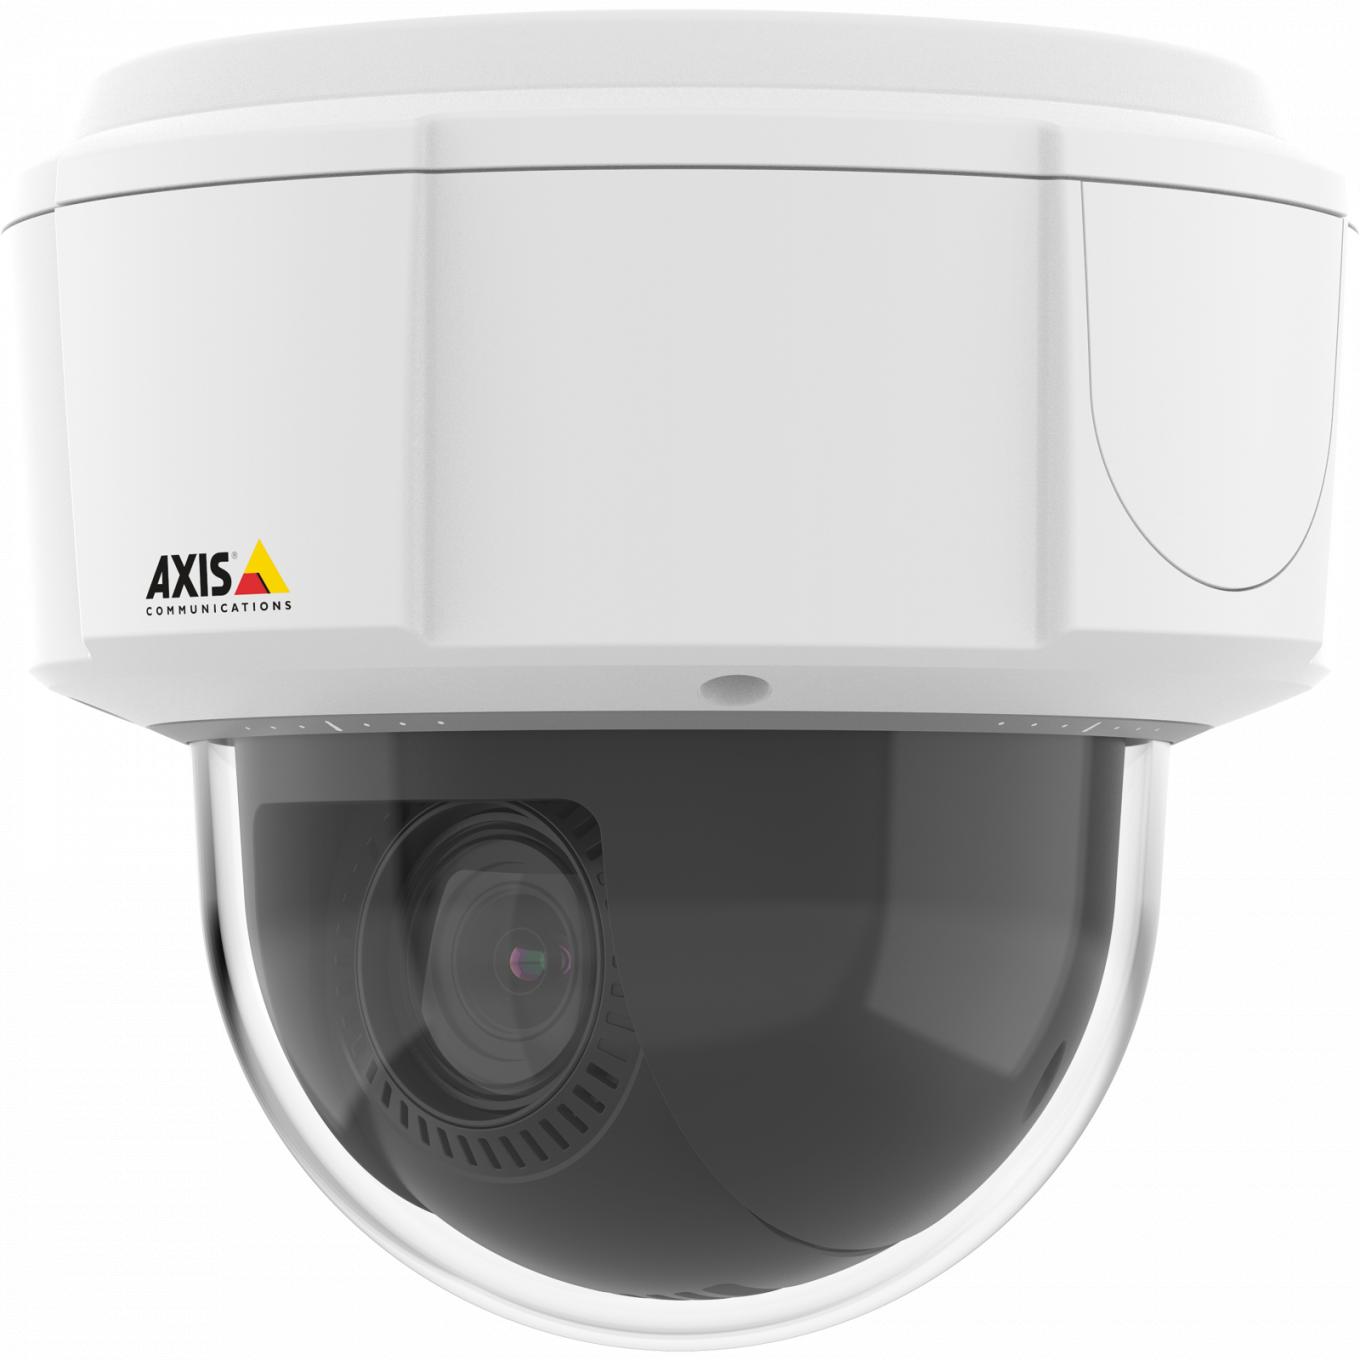 AXIS M5525-E 50HZ Discreet PTZ with HDTV 1080p, 1920x1080, 10x optical zoom, automatic day